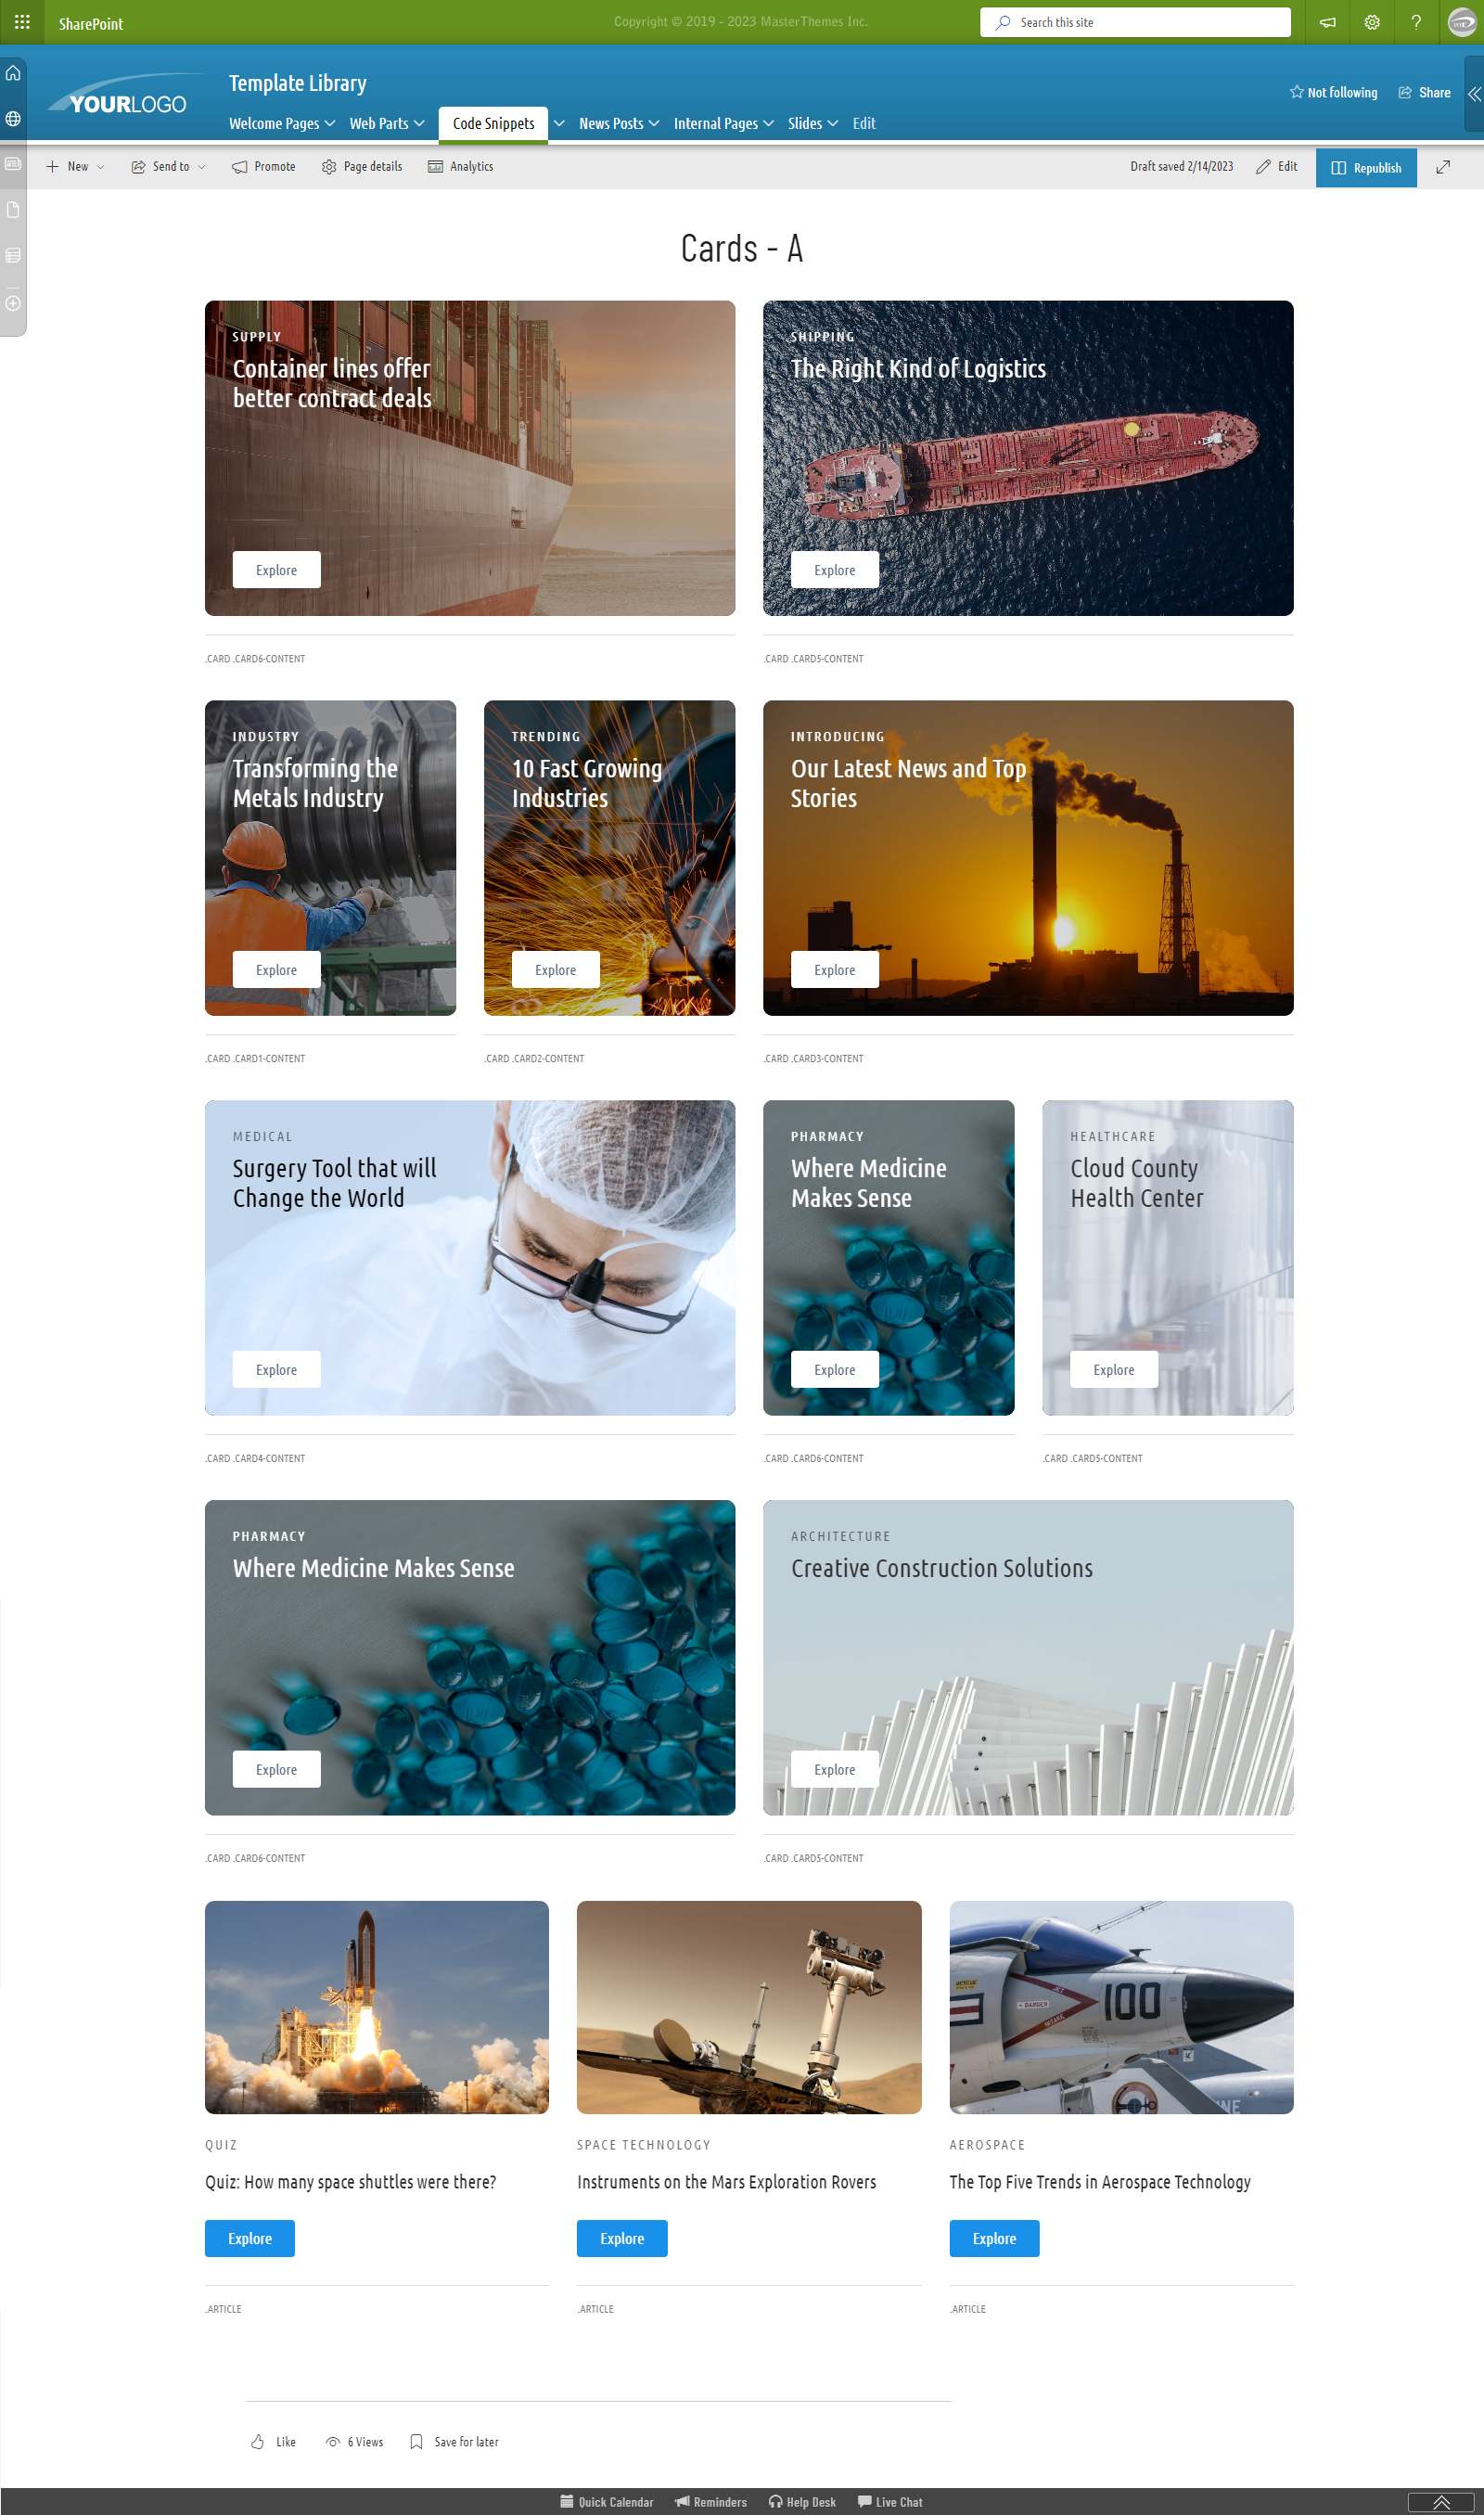 Sharepoint Templates and SharePoint Themes for Modern Intranet. Intranet Templates and Web Parts for SharePoint Online - Office 365